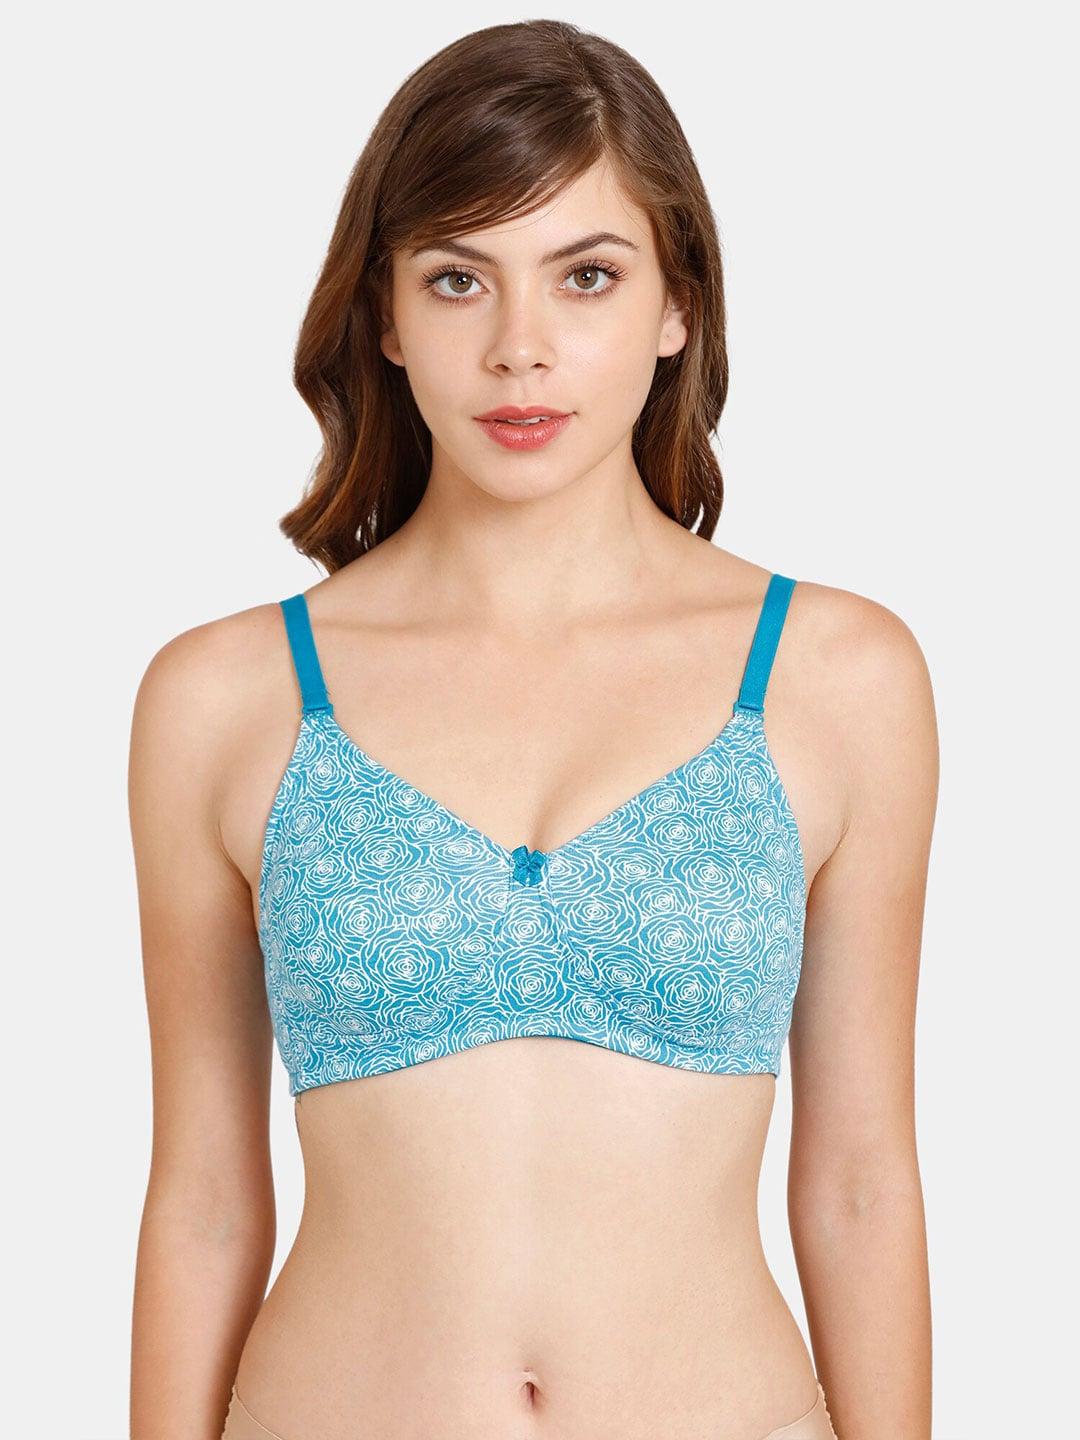 Rosaline by Zivame Blue & White Non Wired & Non Padded Abstract Printed Bra